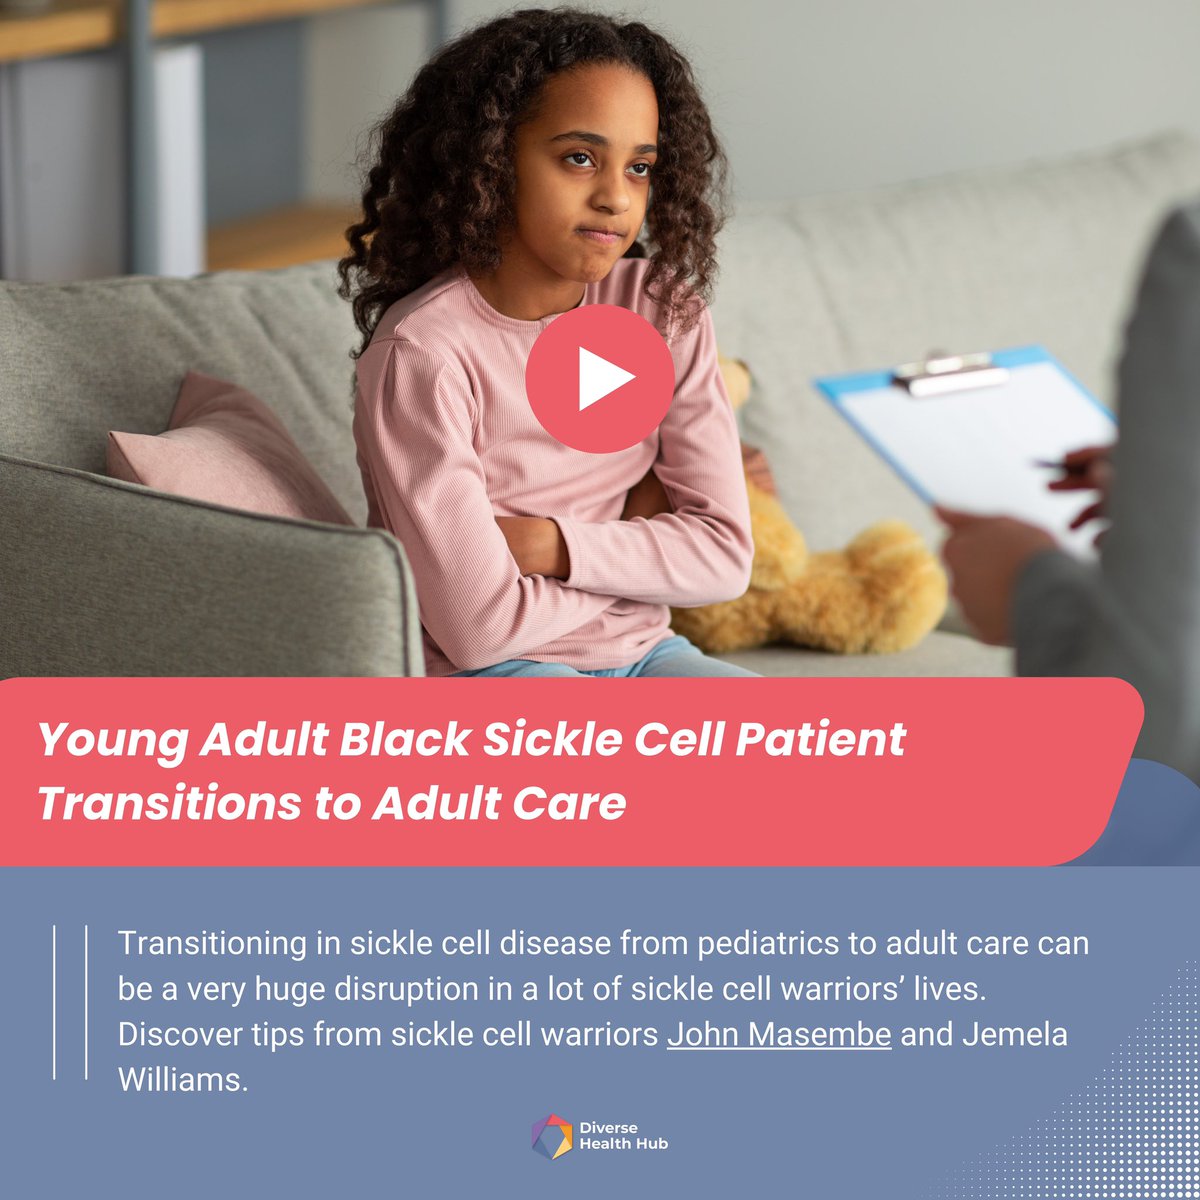 Our #DiagnosticsDecoded 🎥 on transitioning from pediatric to adult #sicklecellcare is now LIVE! Warriors John and Jemela share powerful insights on navigating this journey. Hear candid stories on challenges, race, support, and gain useful tips! Watch now: bit.ly/3wDQpIt